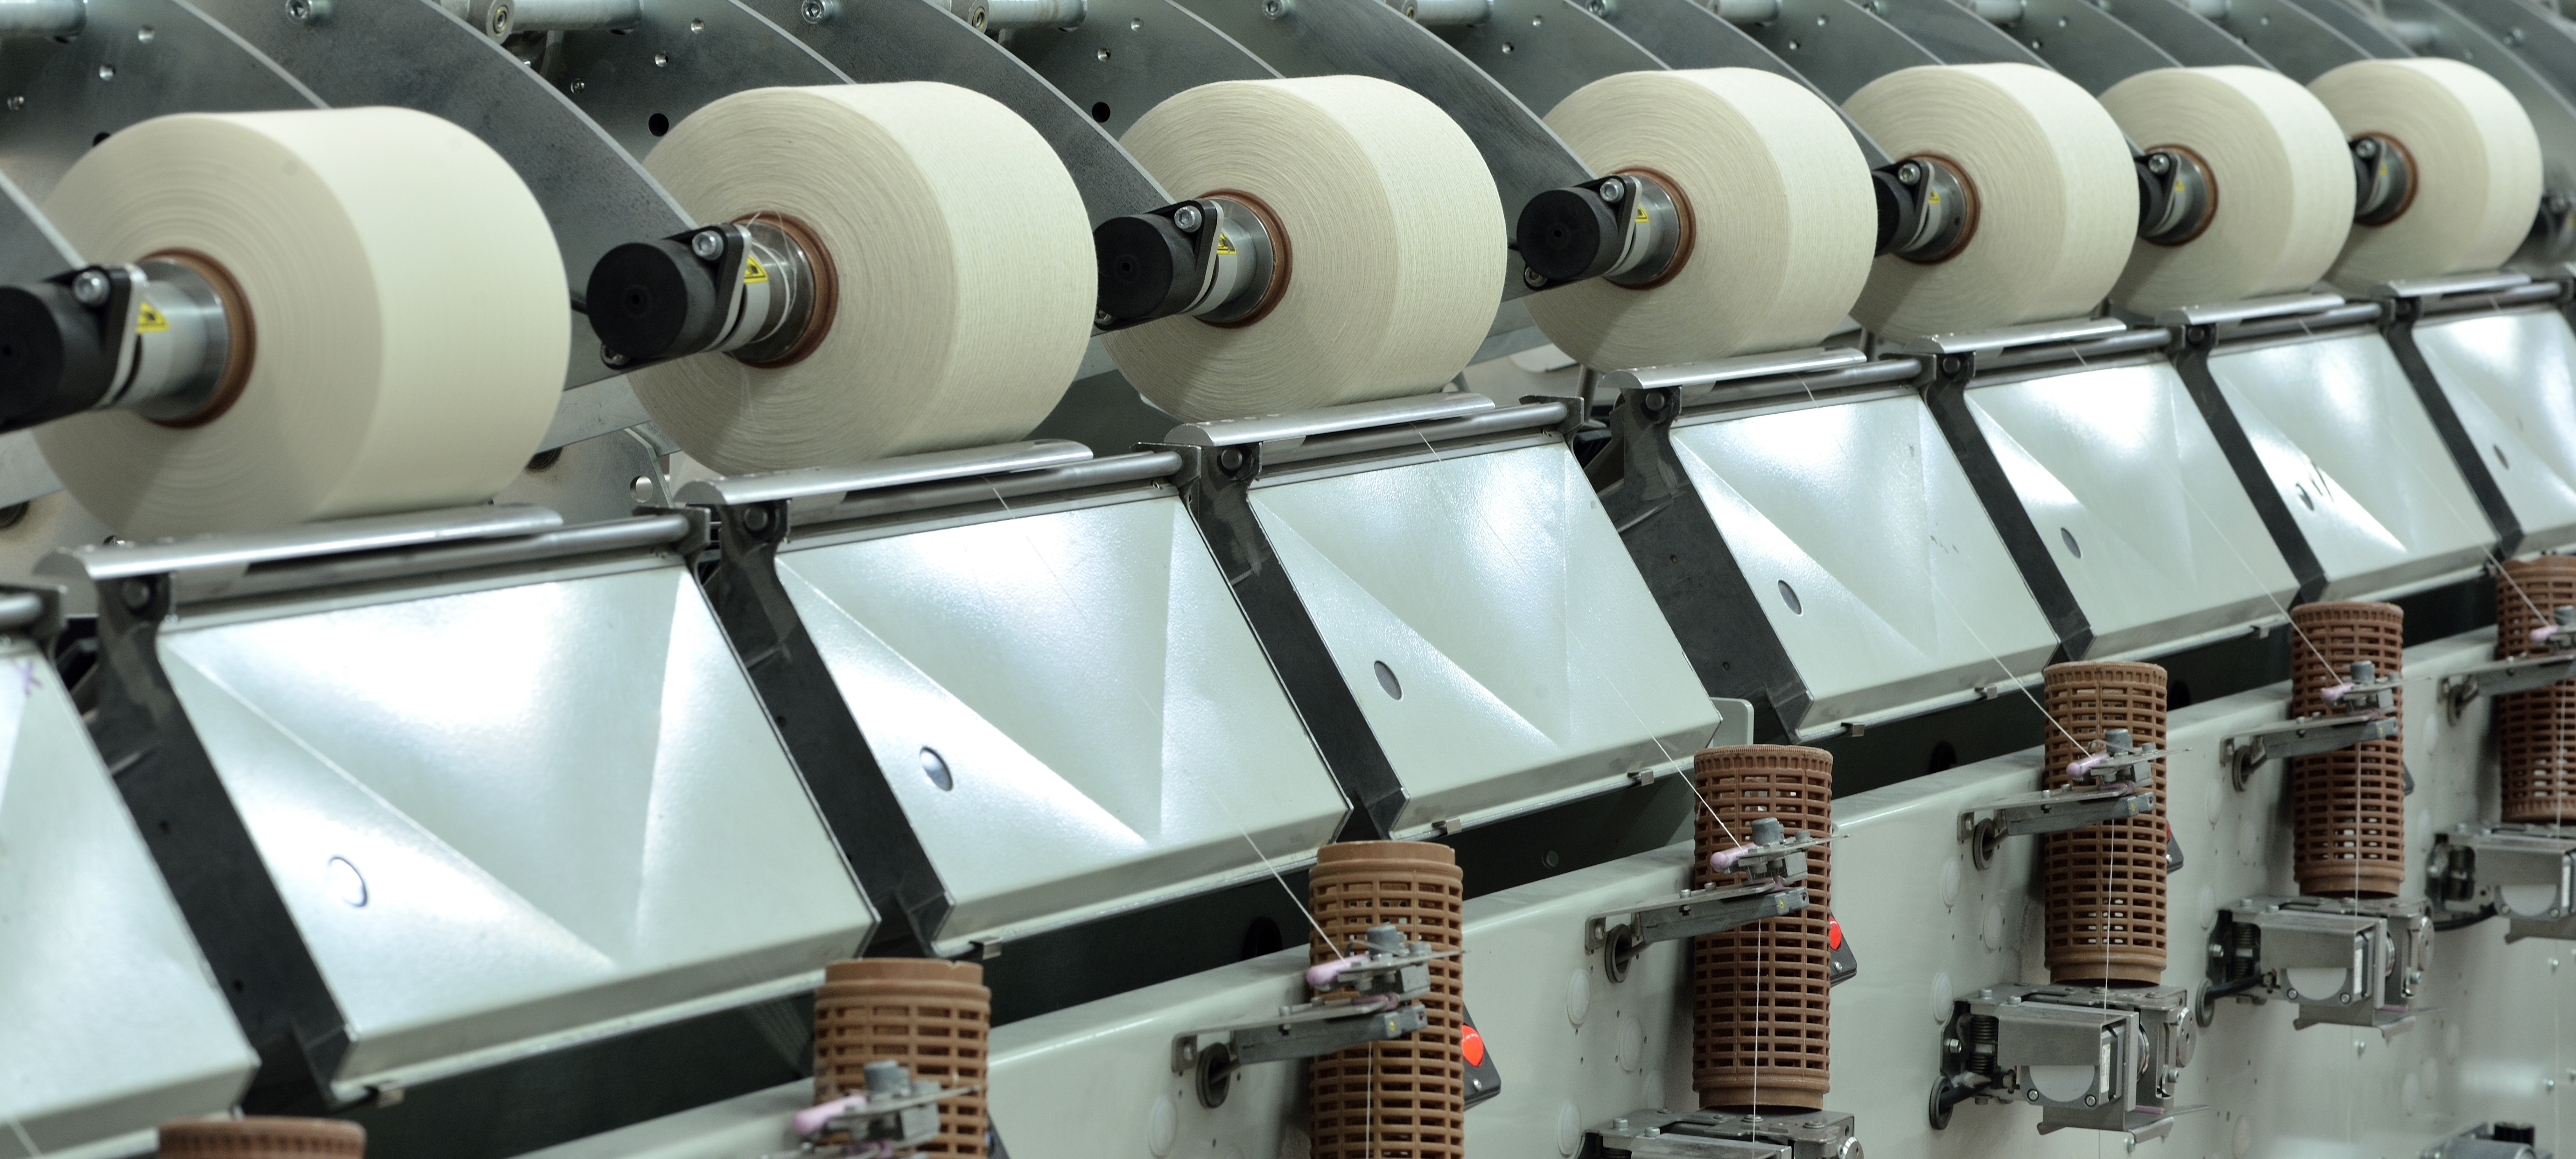 Textile and textile machineries